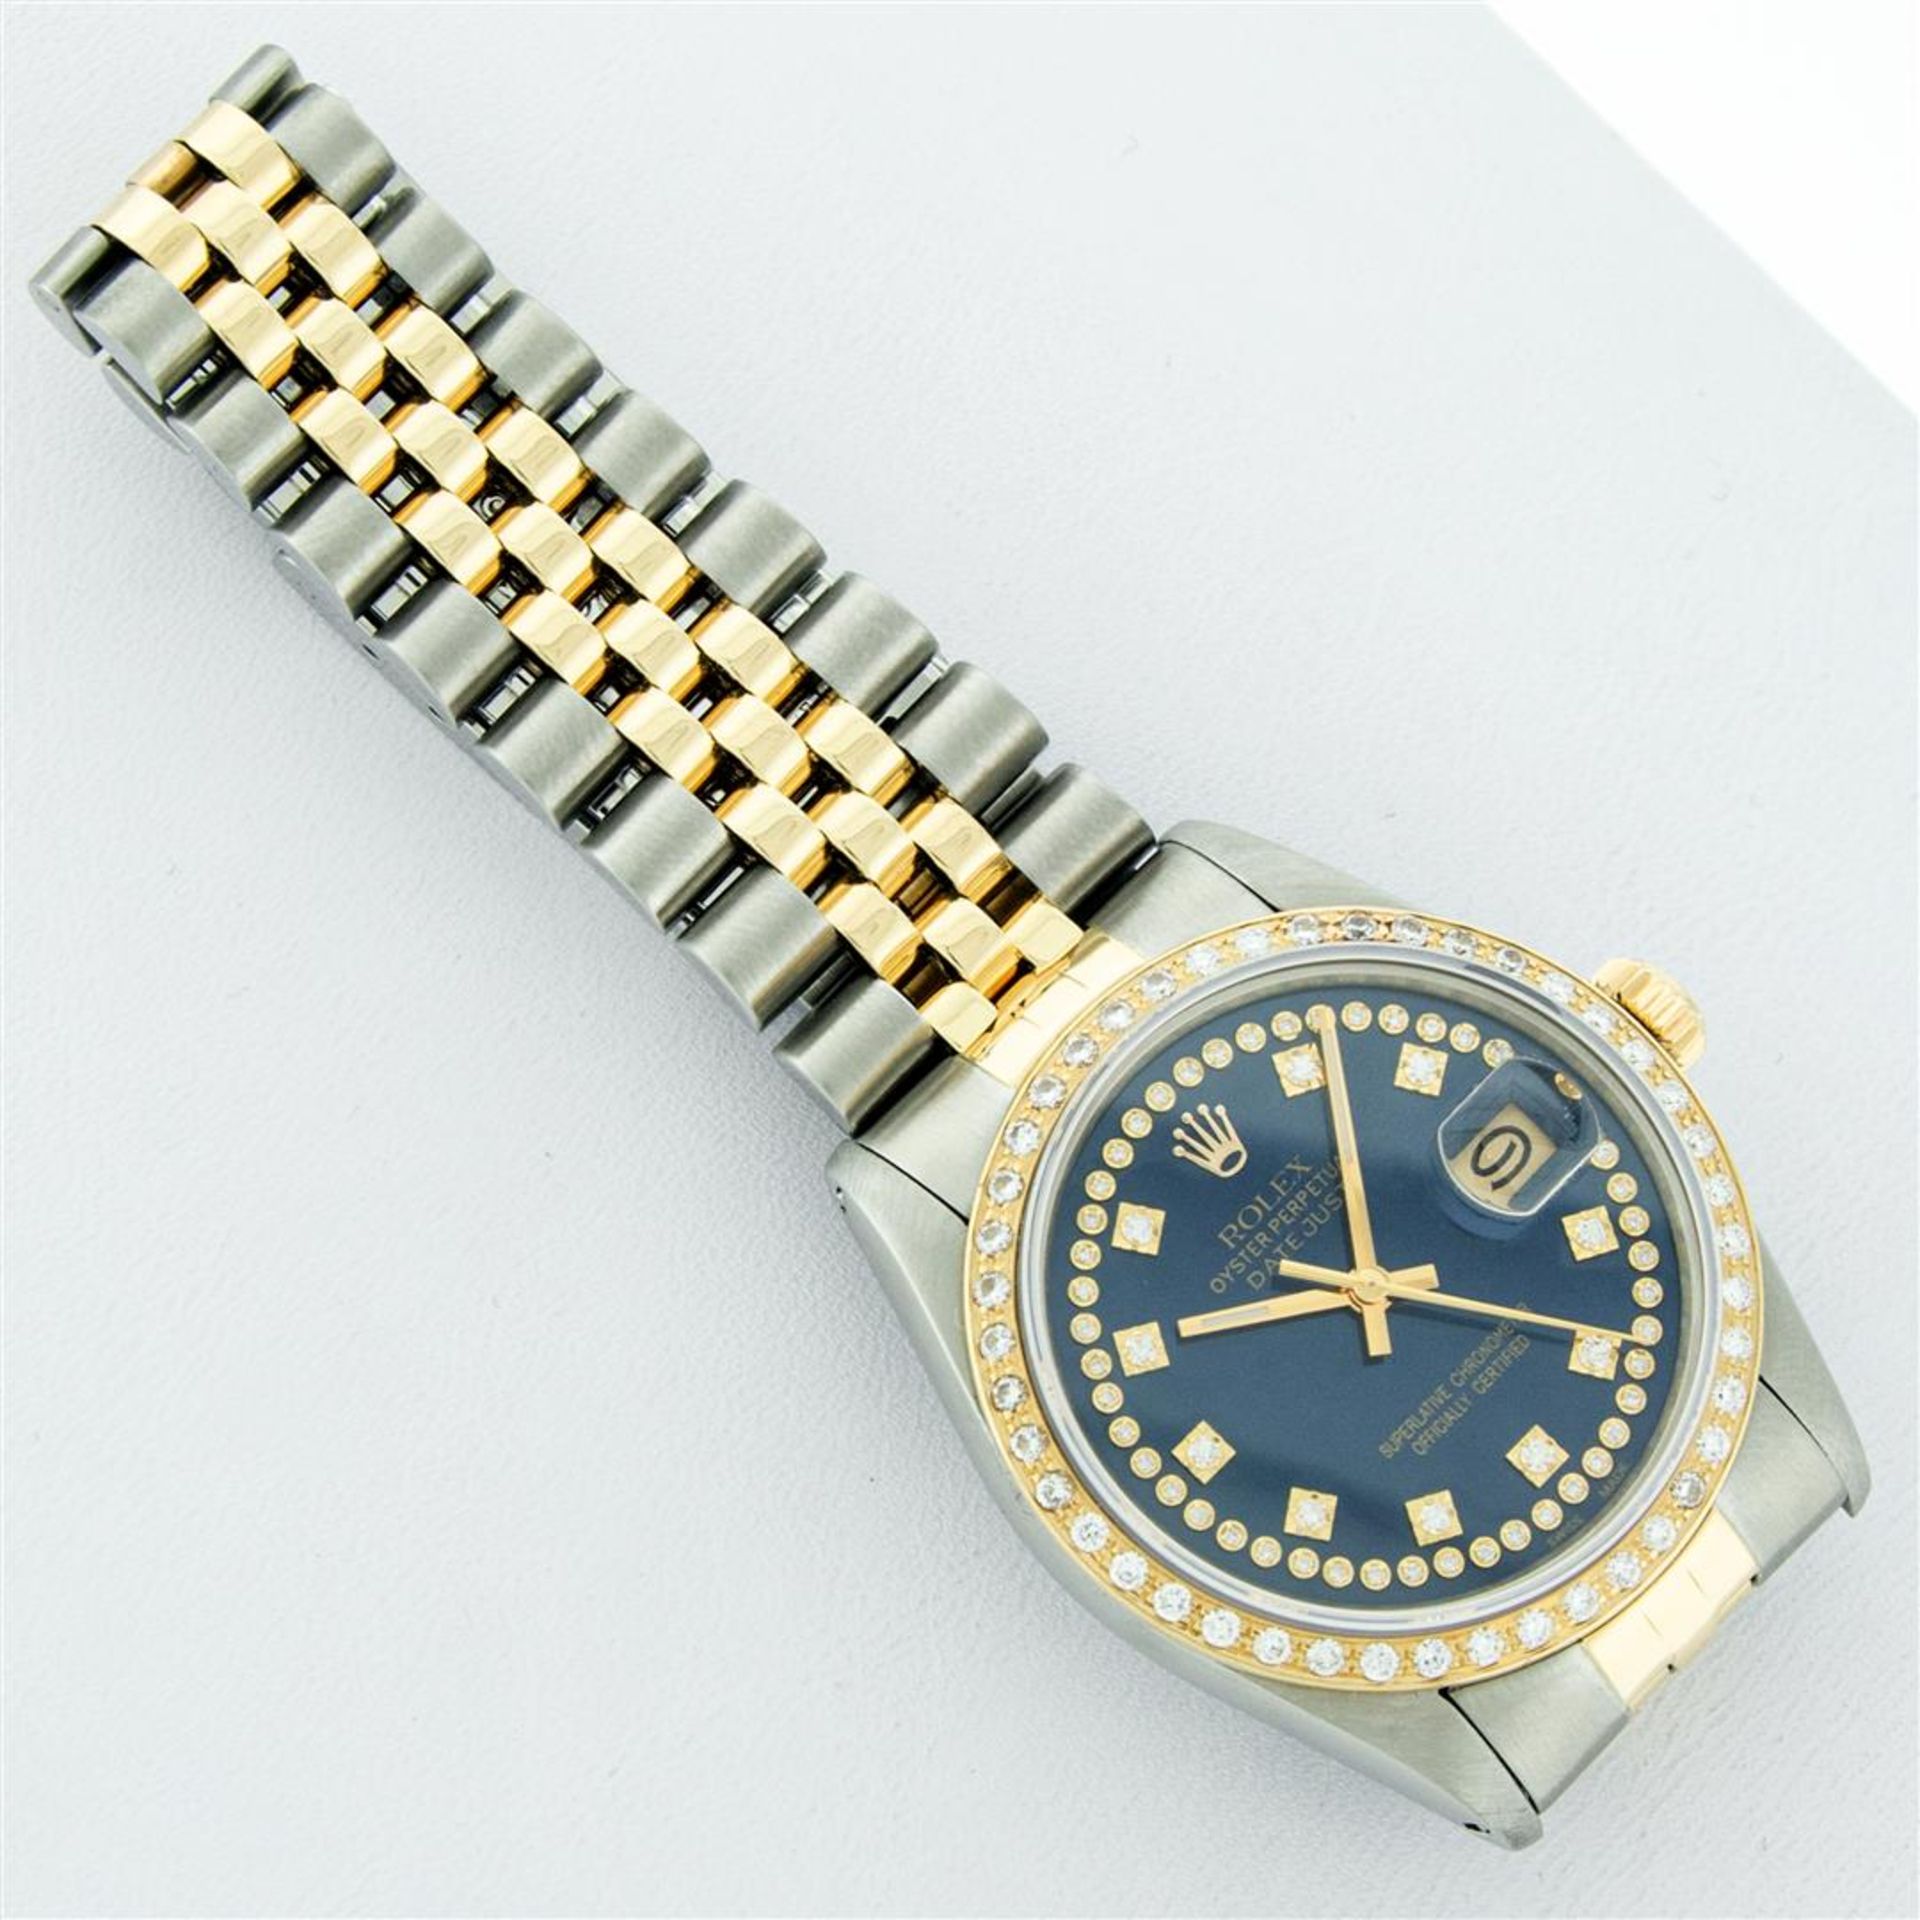 Rolex Mens 2 Tone Blue String VS Diamond Datejust Wristwatch Oyster Perpetual - Image 7 of 9